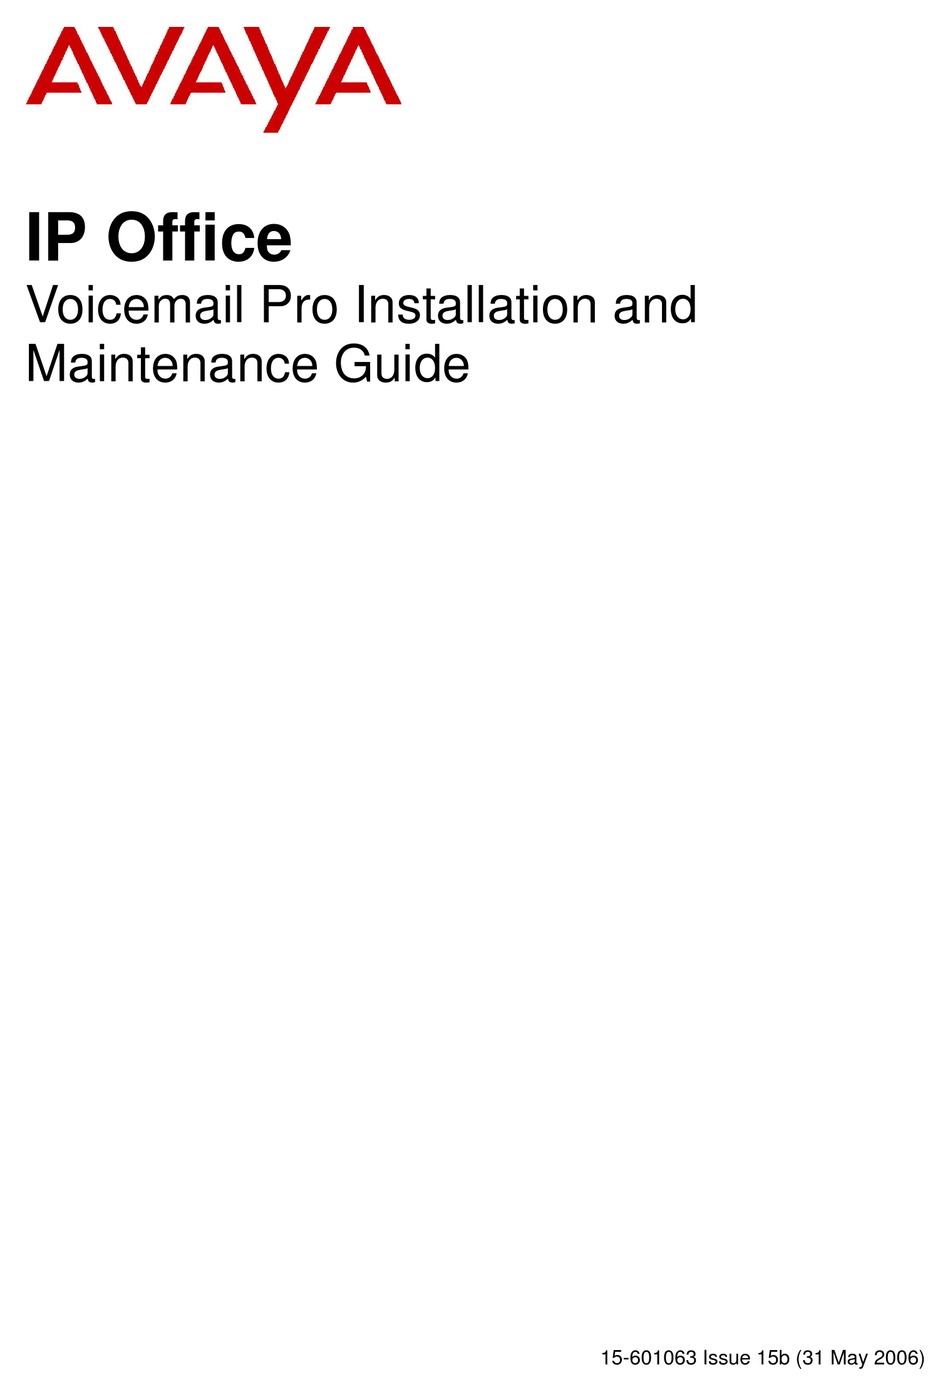 Saving Configuration Changes And Making Them Live; Adding An Administrator  - Avaya IP Office Voicemail Pro Installation And Maintenance Manual [Page  121] | ManualsLib